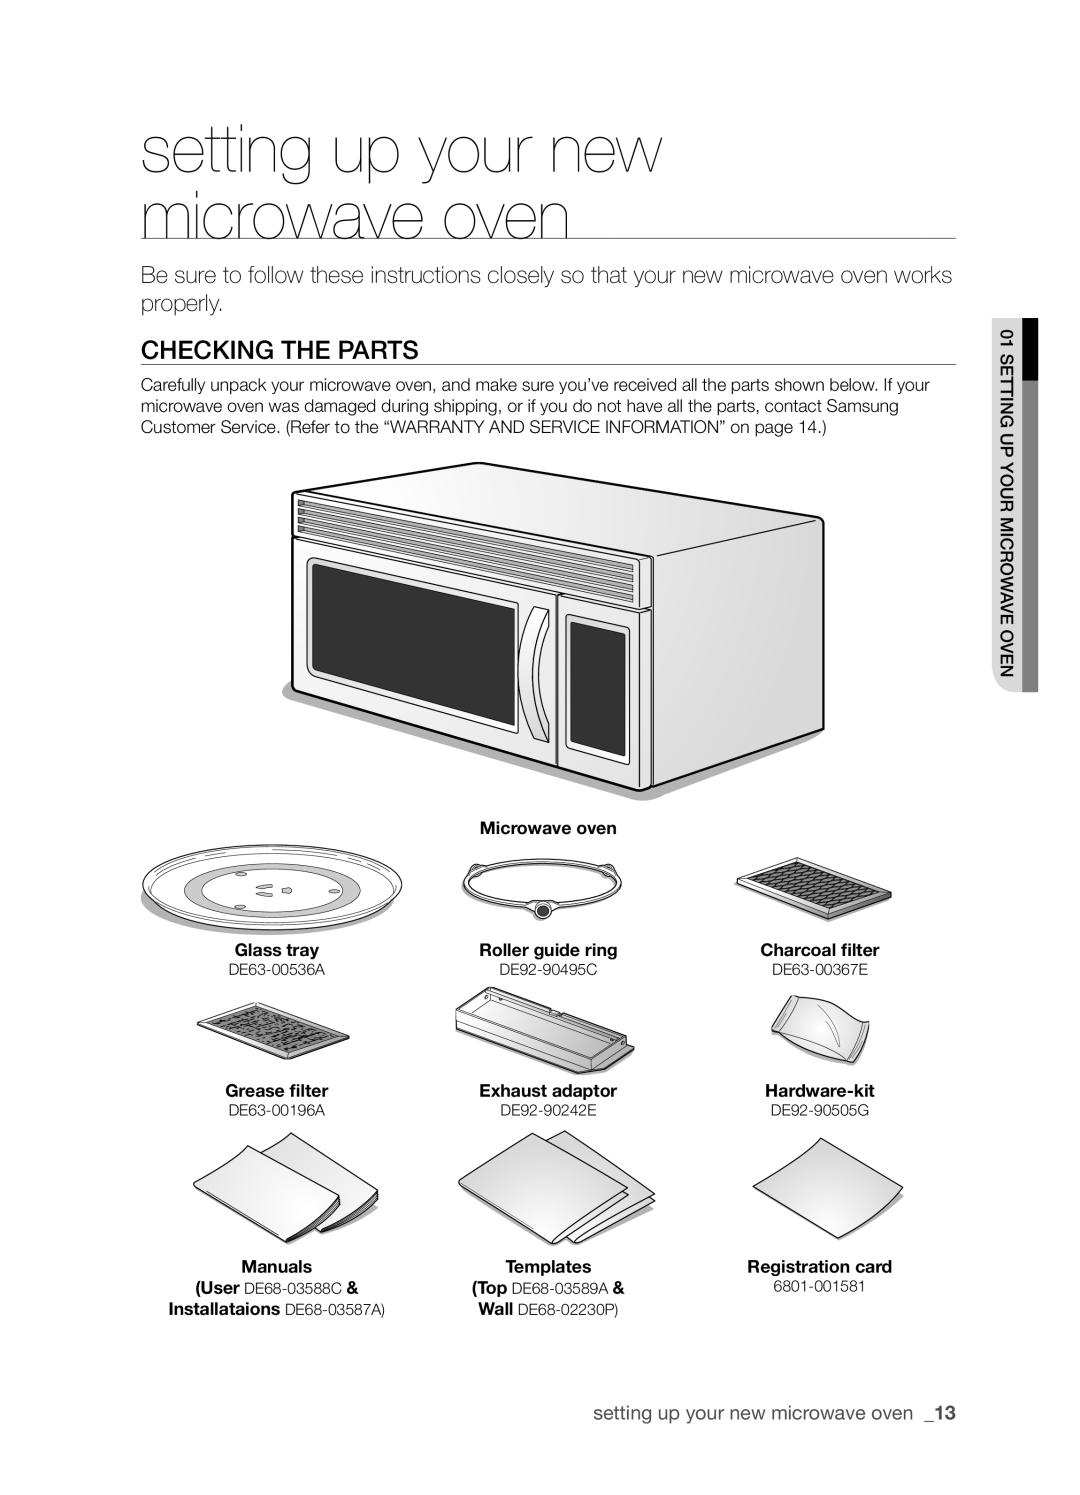 Samsung SMH9151 setting up your new microwave oven, Checking the parts, Microwave oven, Glass tray, Grease filter, Manuals 